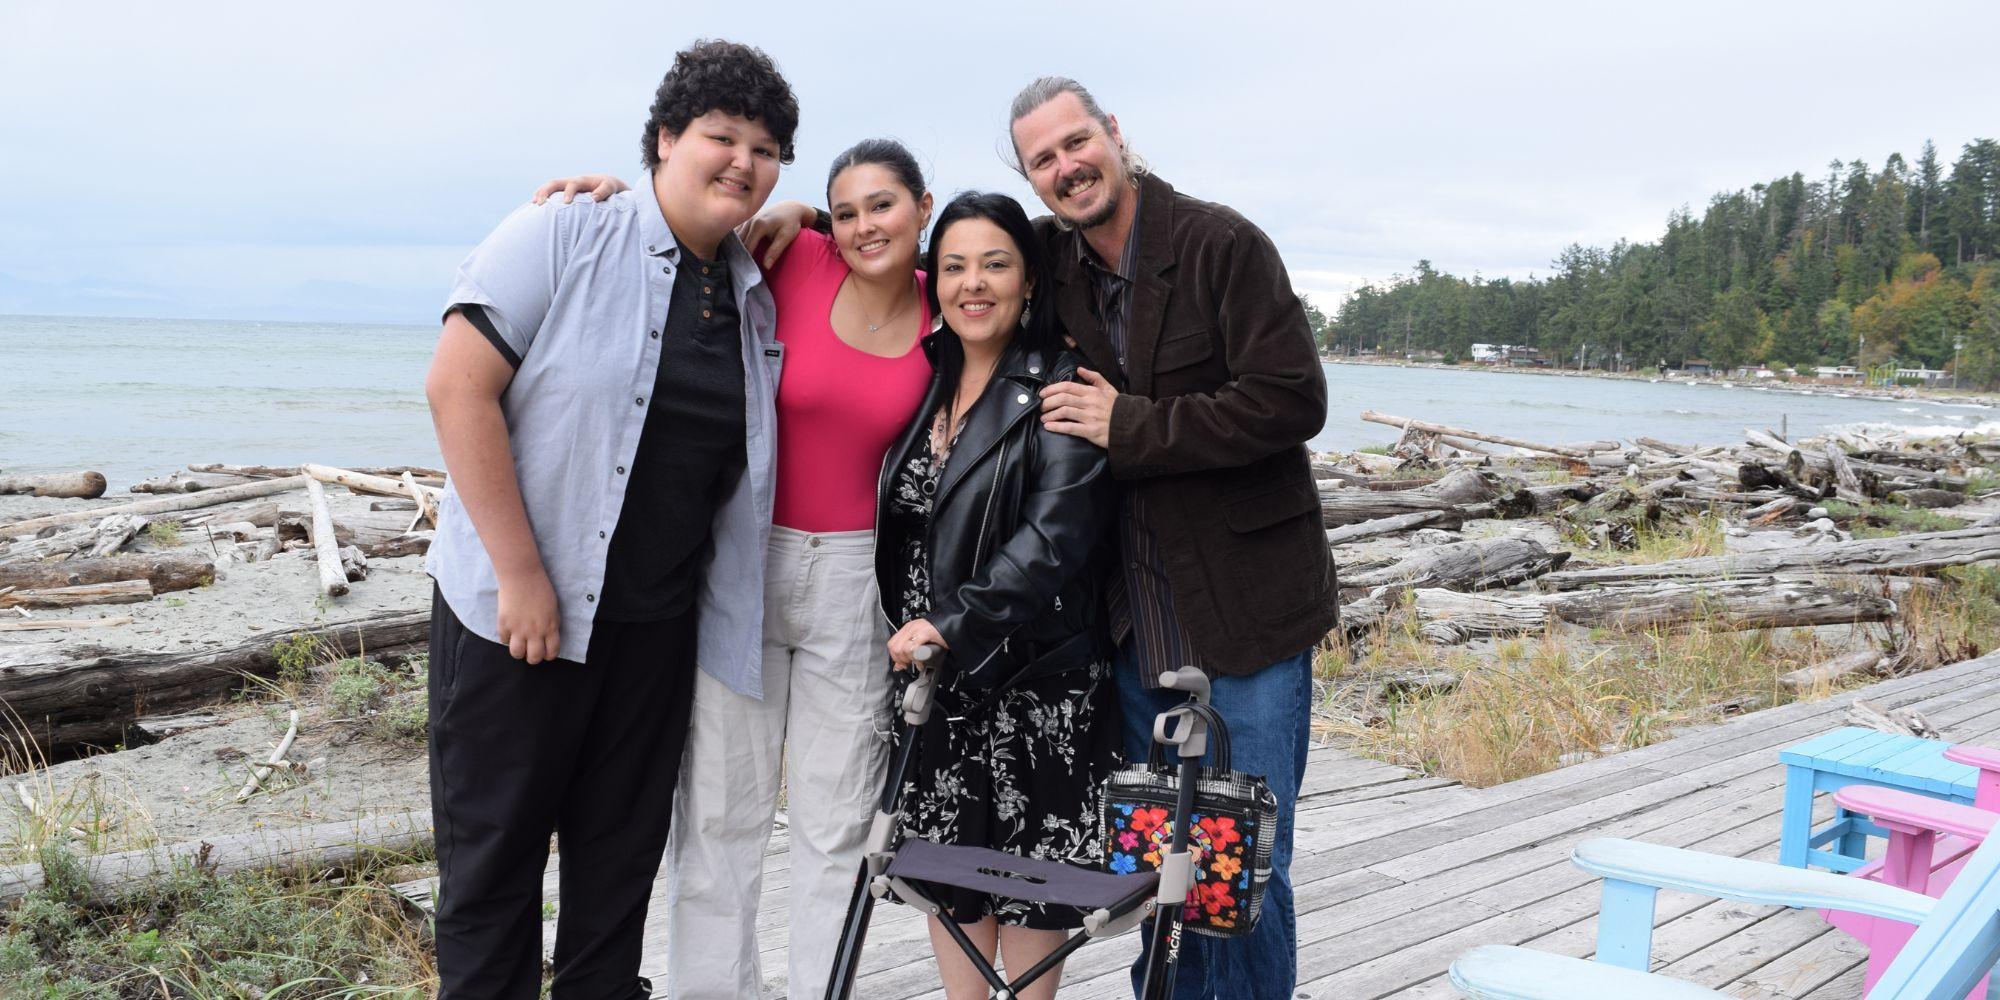 Eric, Michelle and their two children embracing on a Vancouver Island beach. Michelle is holding a walker.